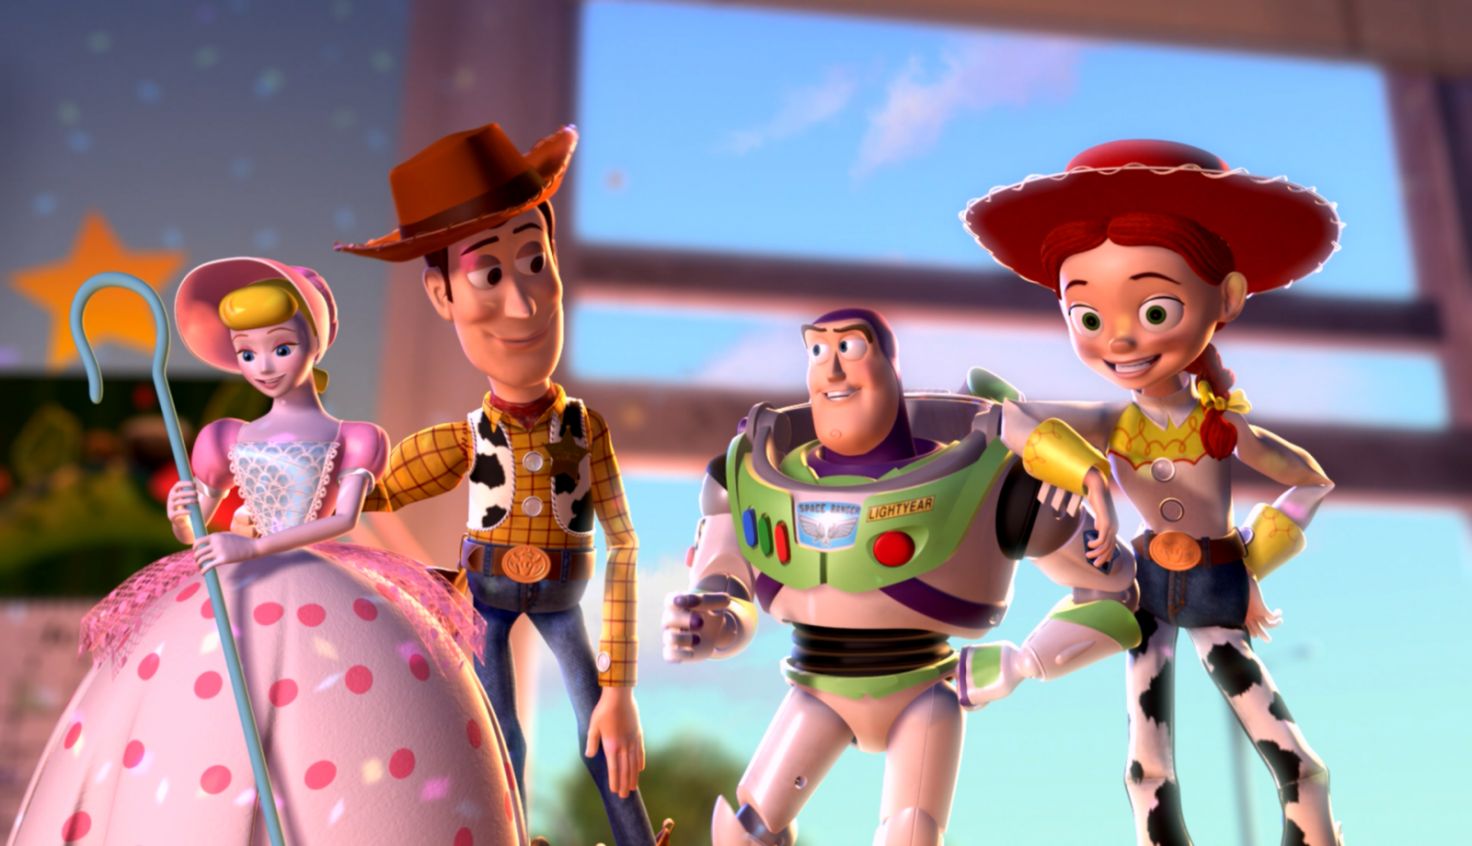 31 Woody Toy Story Hd Wallpapers Background Images - Toy Story Jessie And Bo Peep - HD Wallpaper 